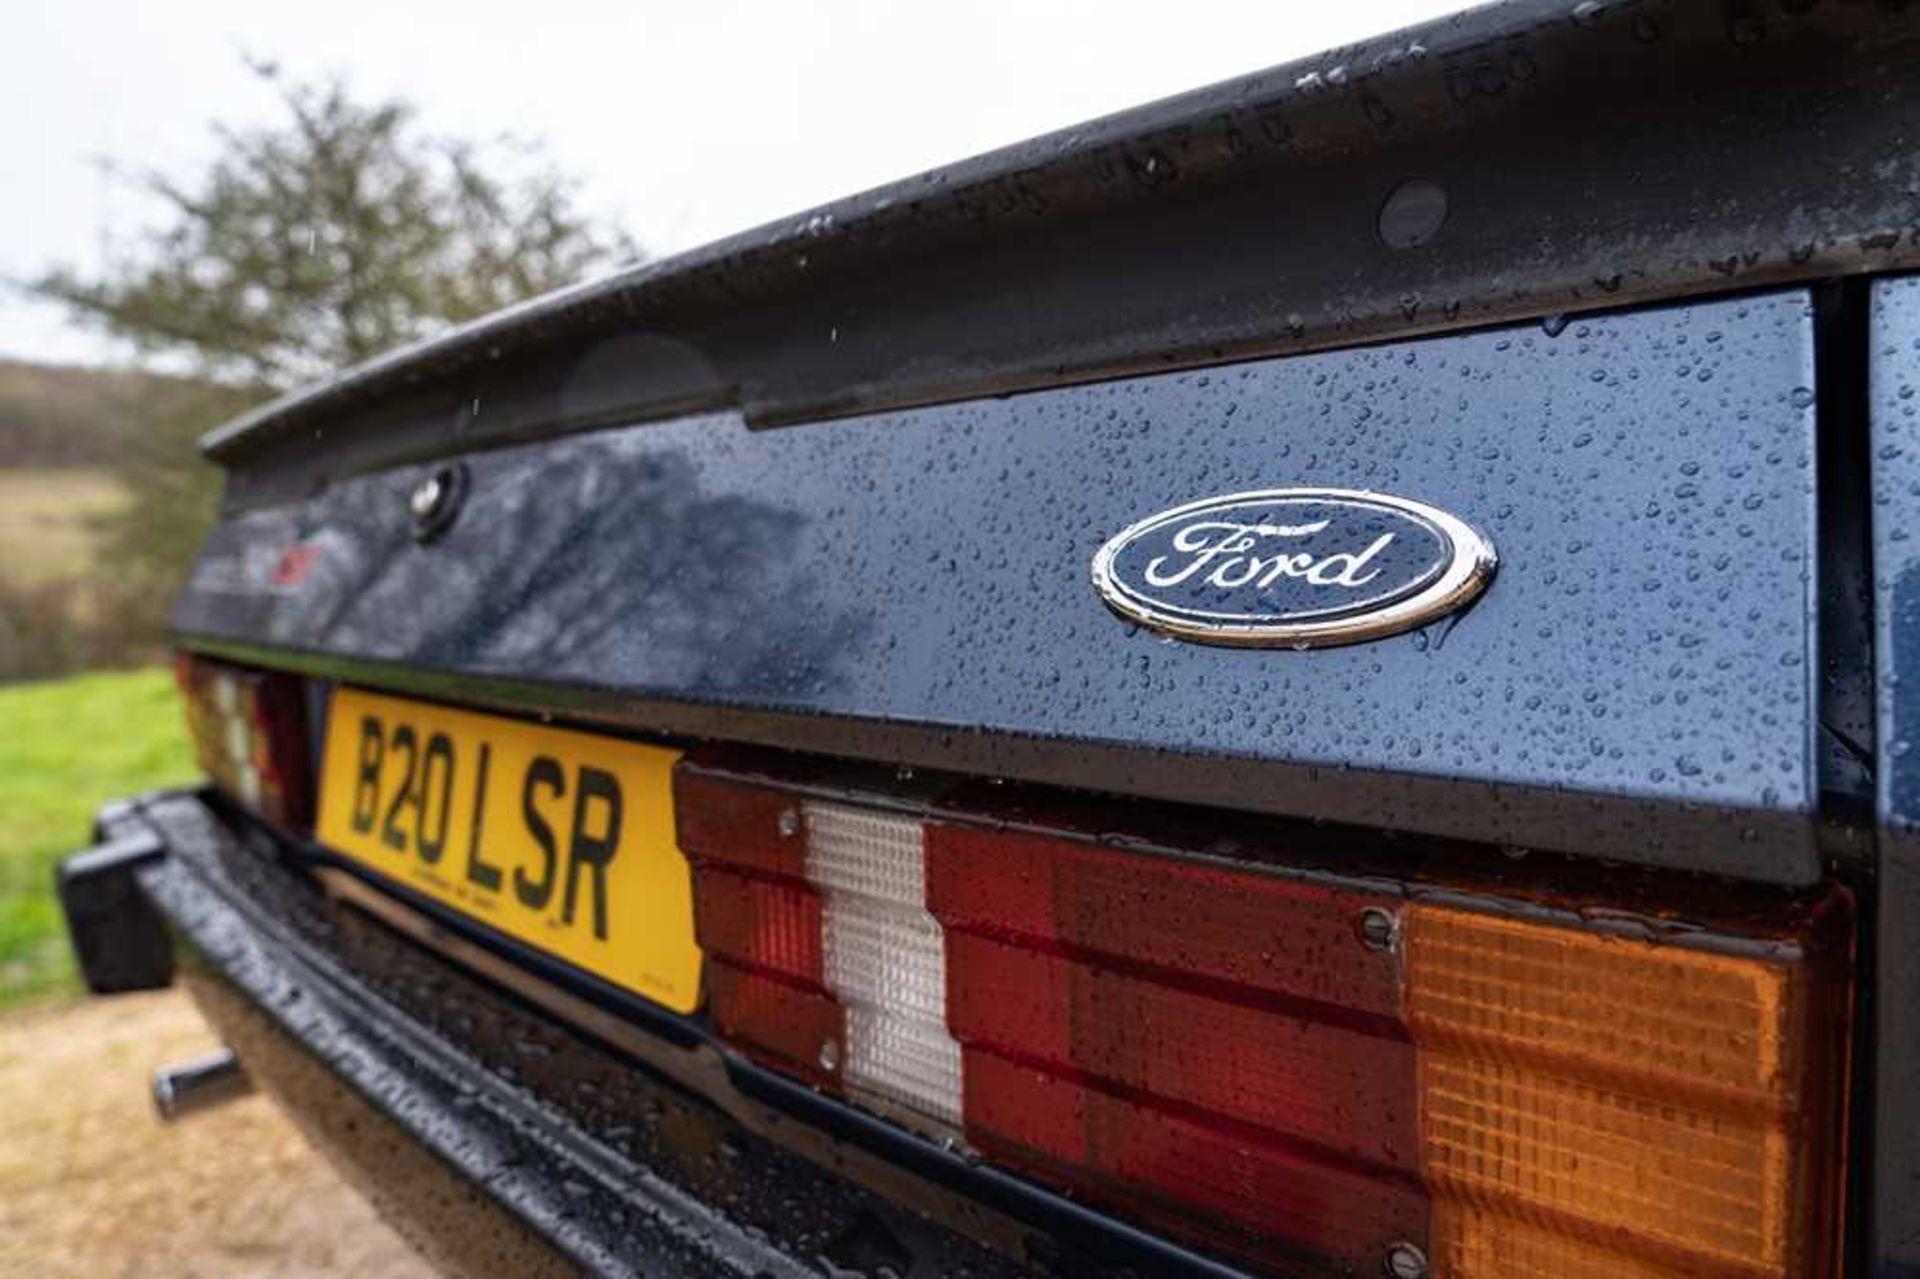 1985 Ford Capri Laser 2.0 Litre Warranted 55,300 miles from new - Image 25 of 67